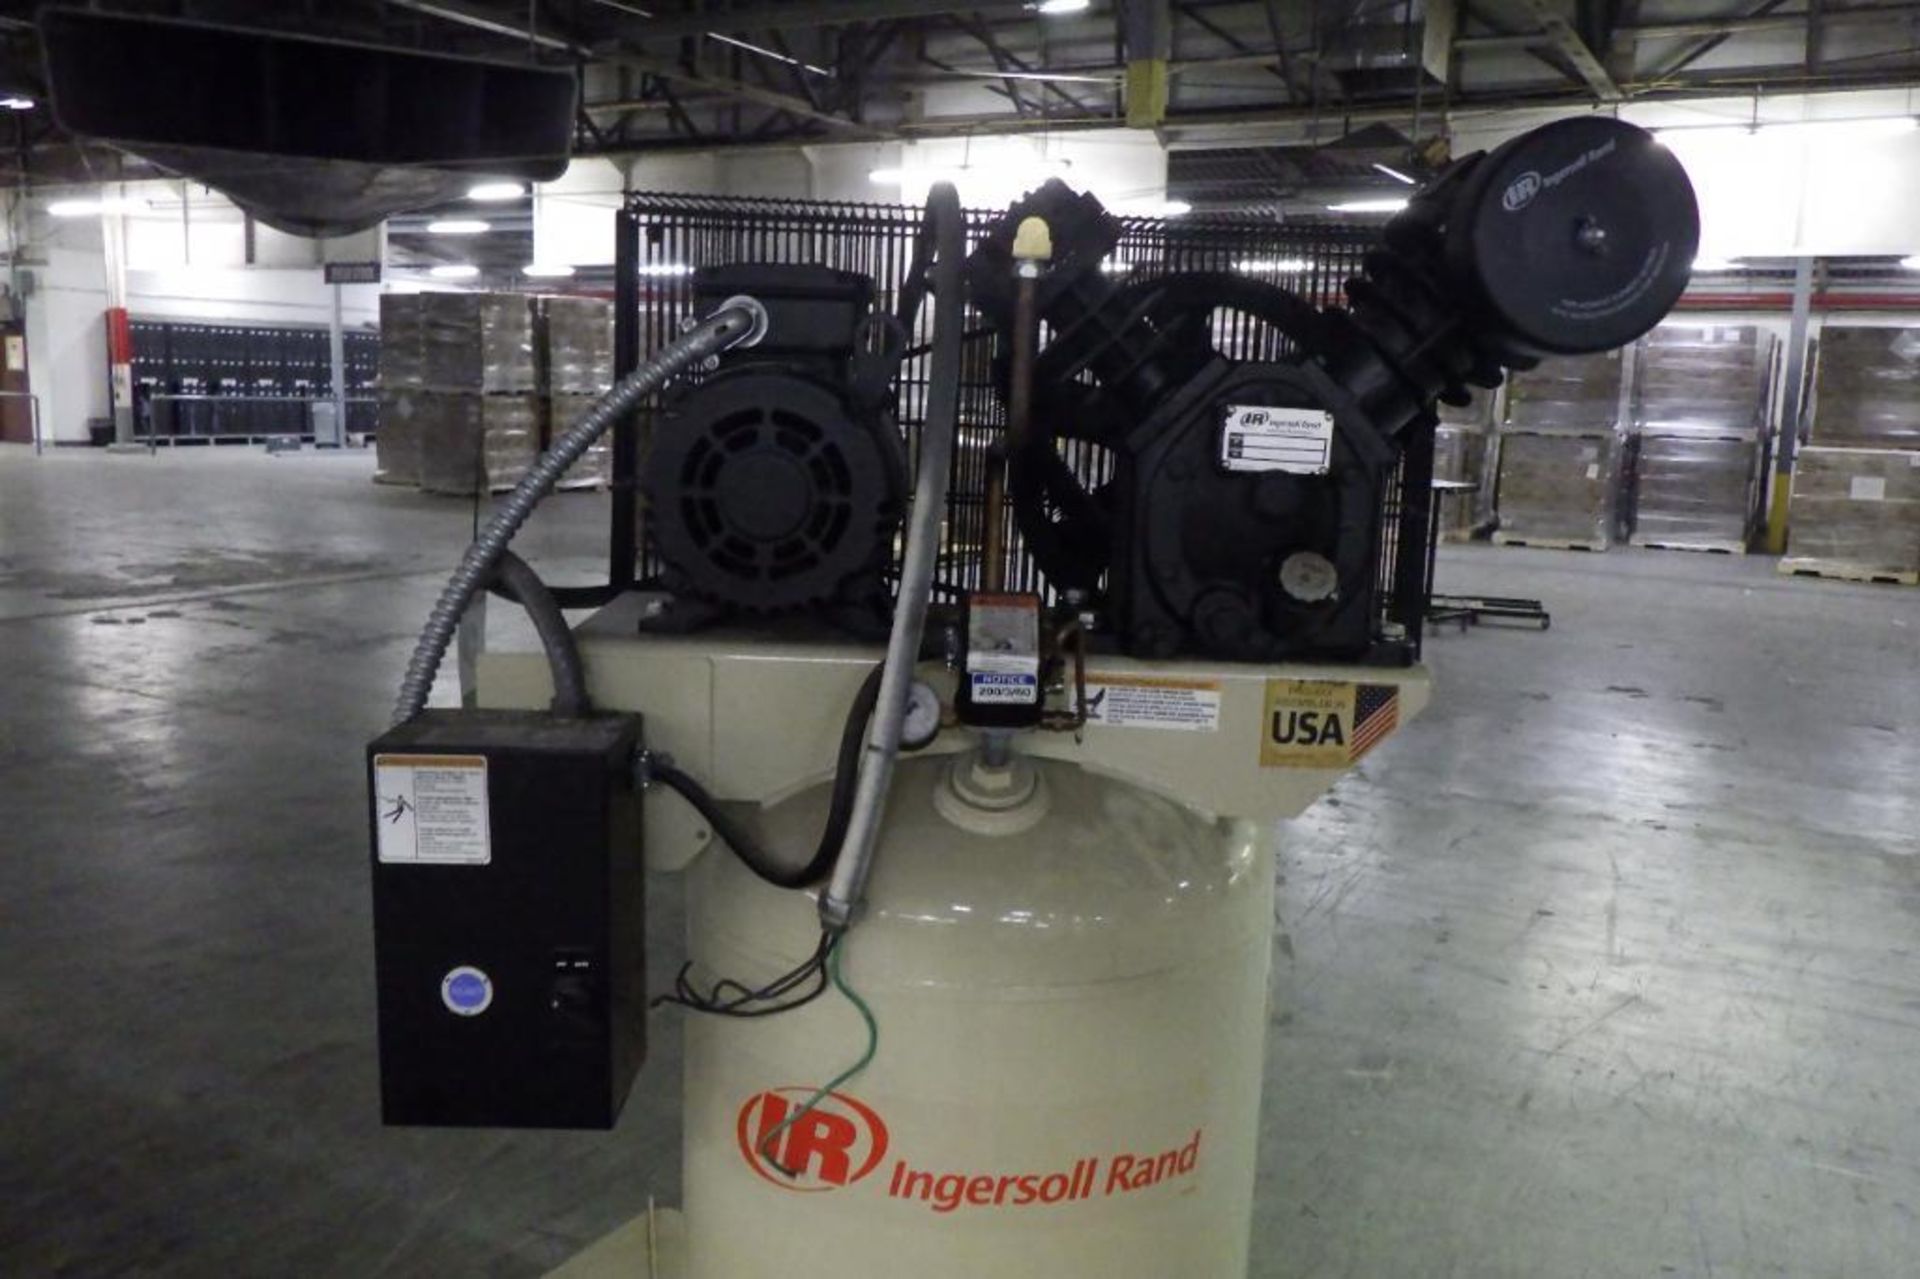 Ingersoll rand air compressor with dryer - Image 5 of 12